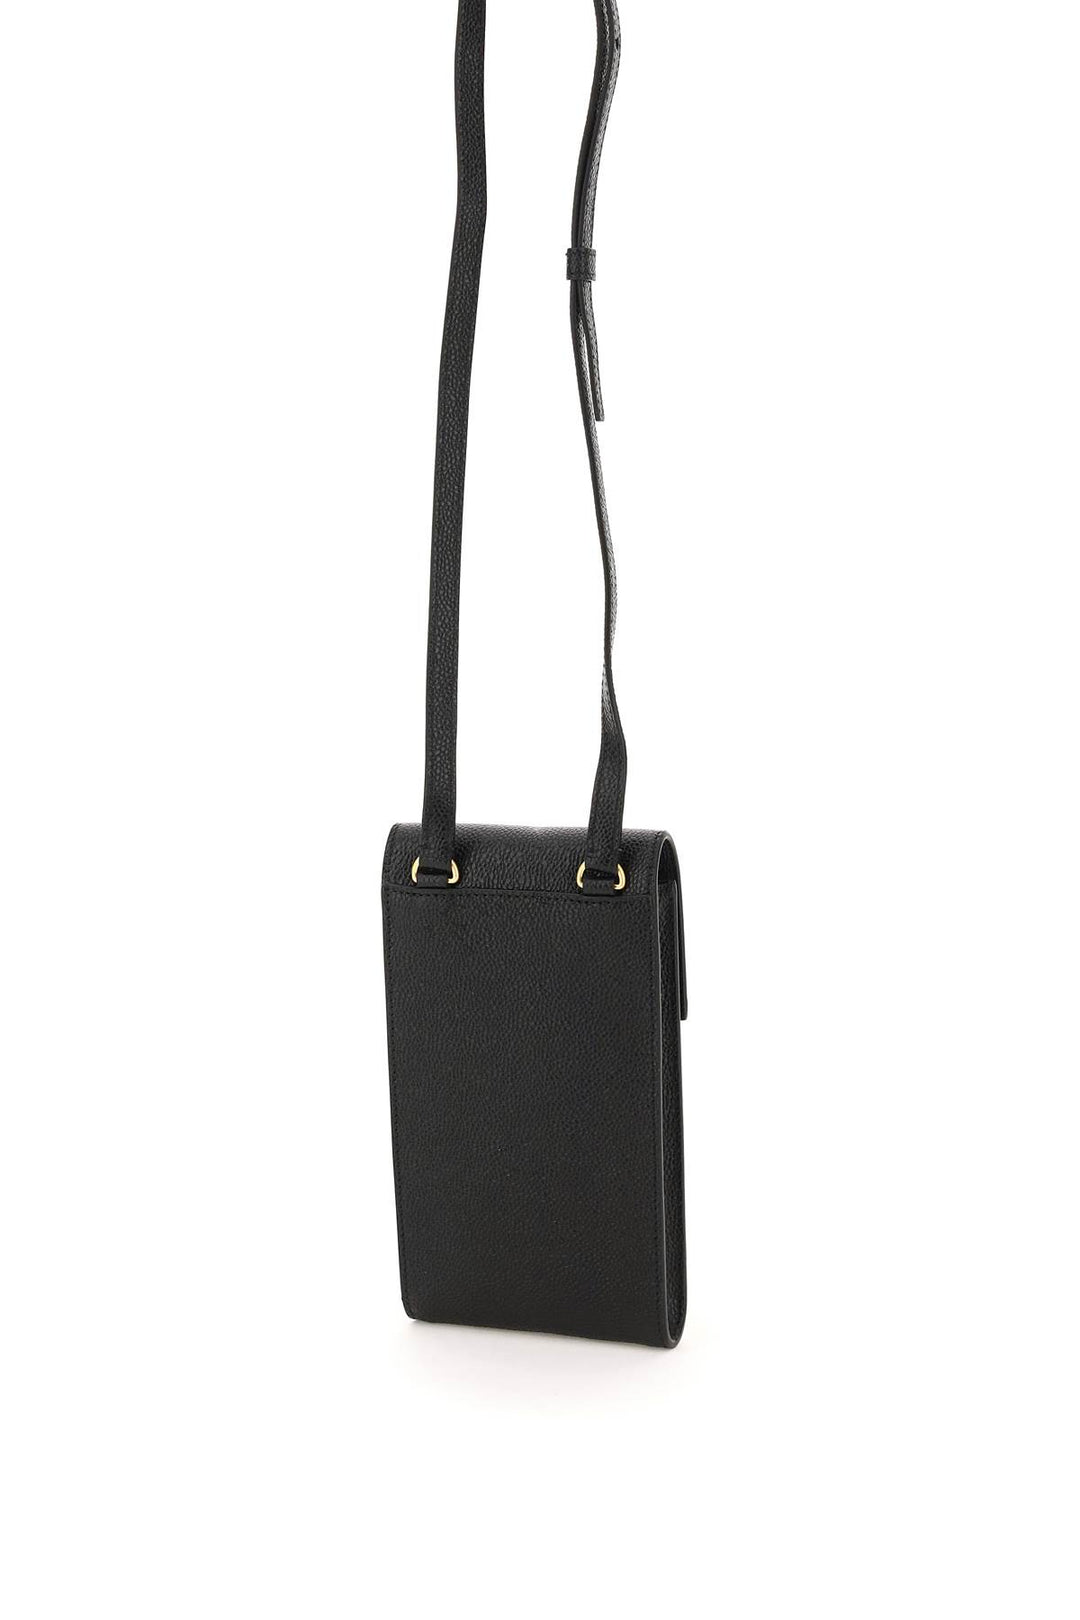 Thom Browne Pebble Grain Leather Phone Holder With Strap   Nero